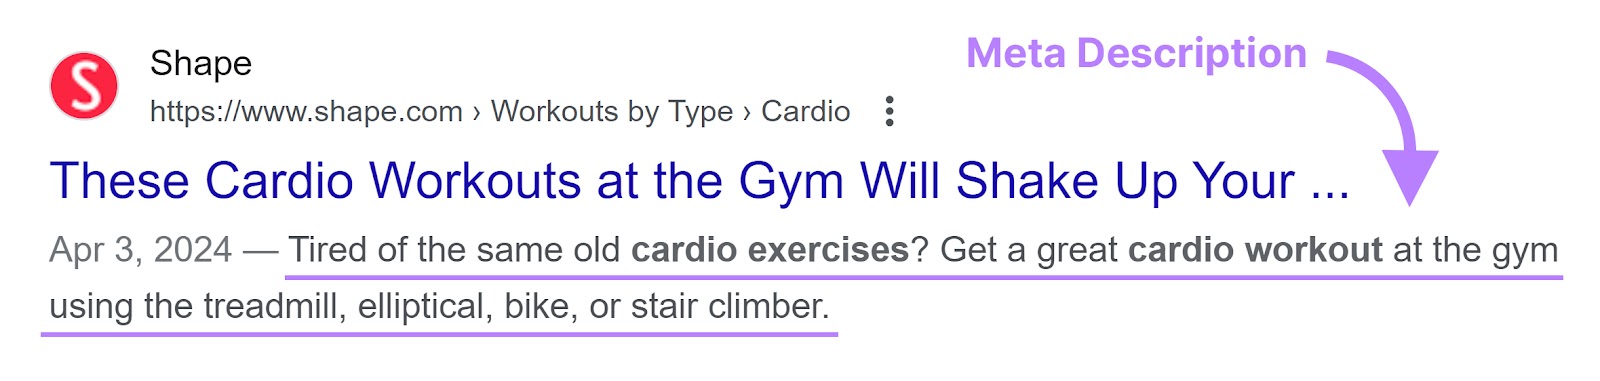 "Shape" website meta description of a cardio workout article as shown on Google Search Engine Result Page.